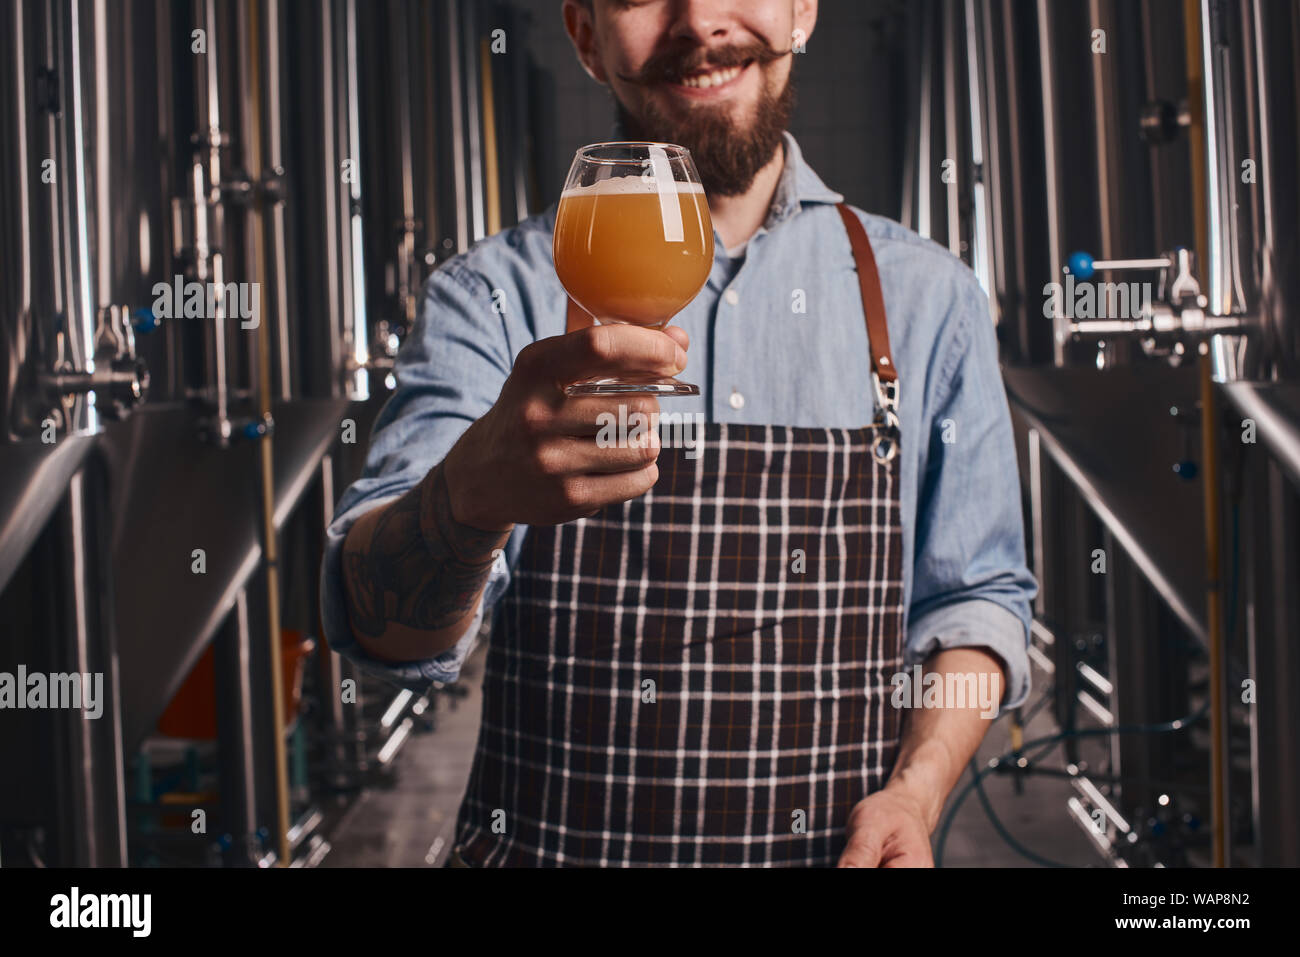 Bartender in the apron checks beer quality holding it in front of himself and looking at the color. Stock Photo